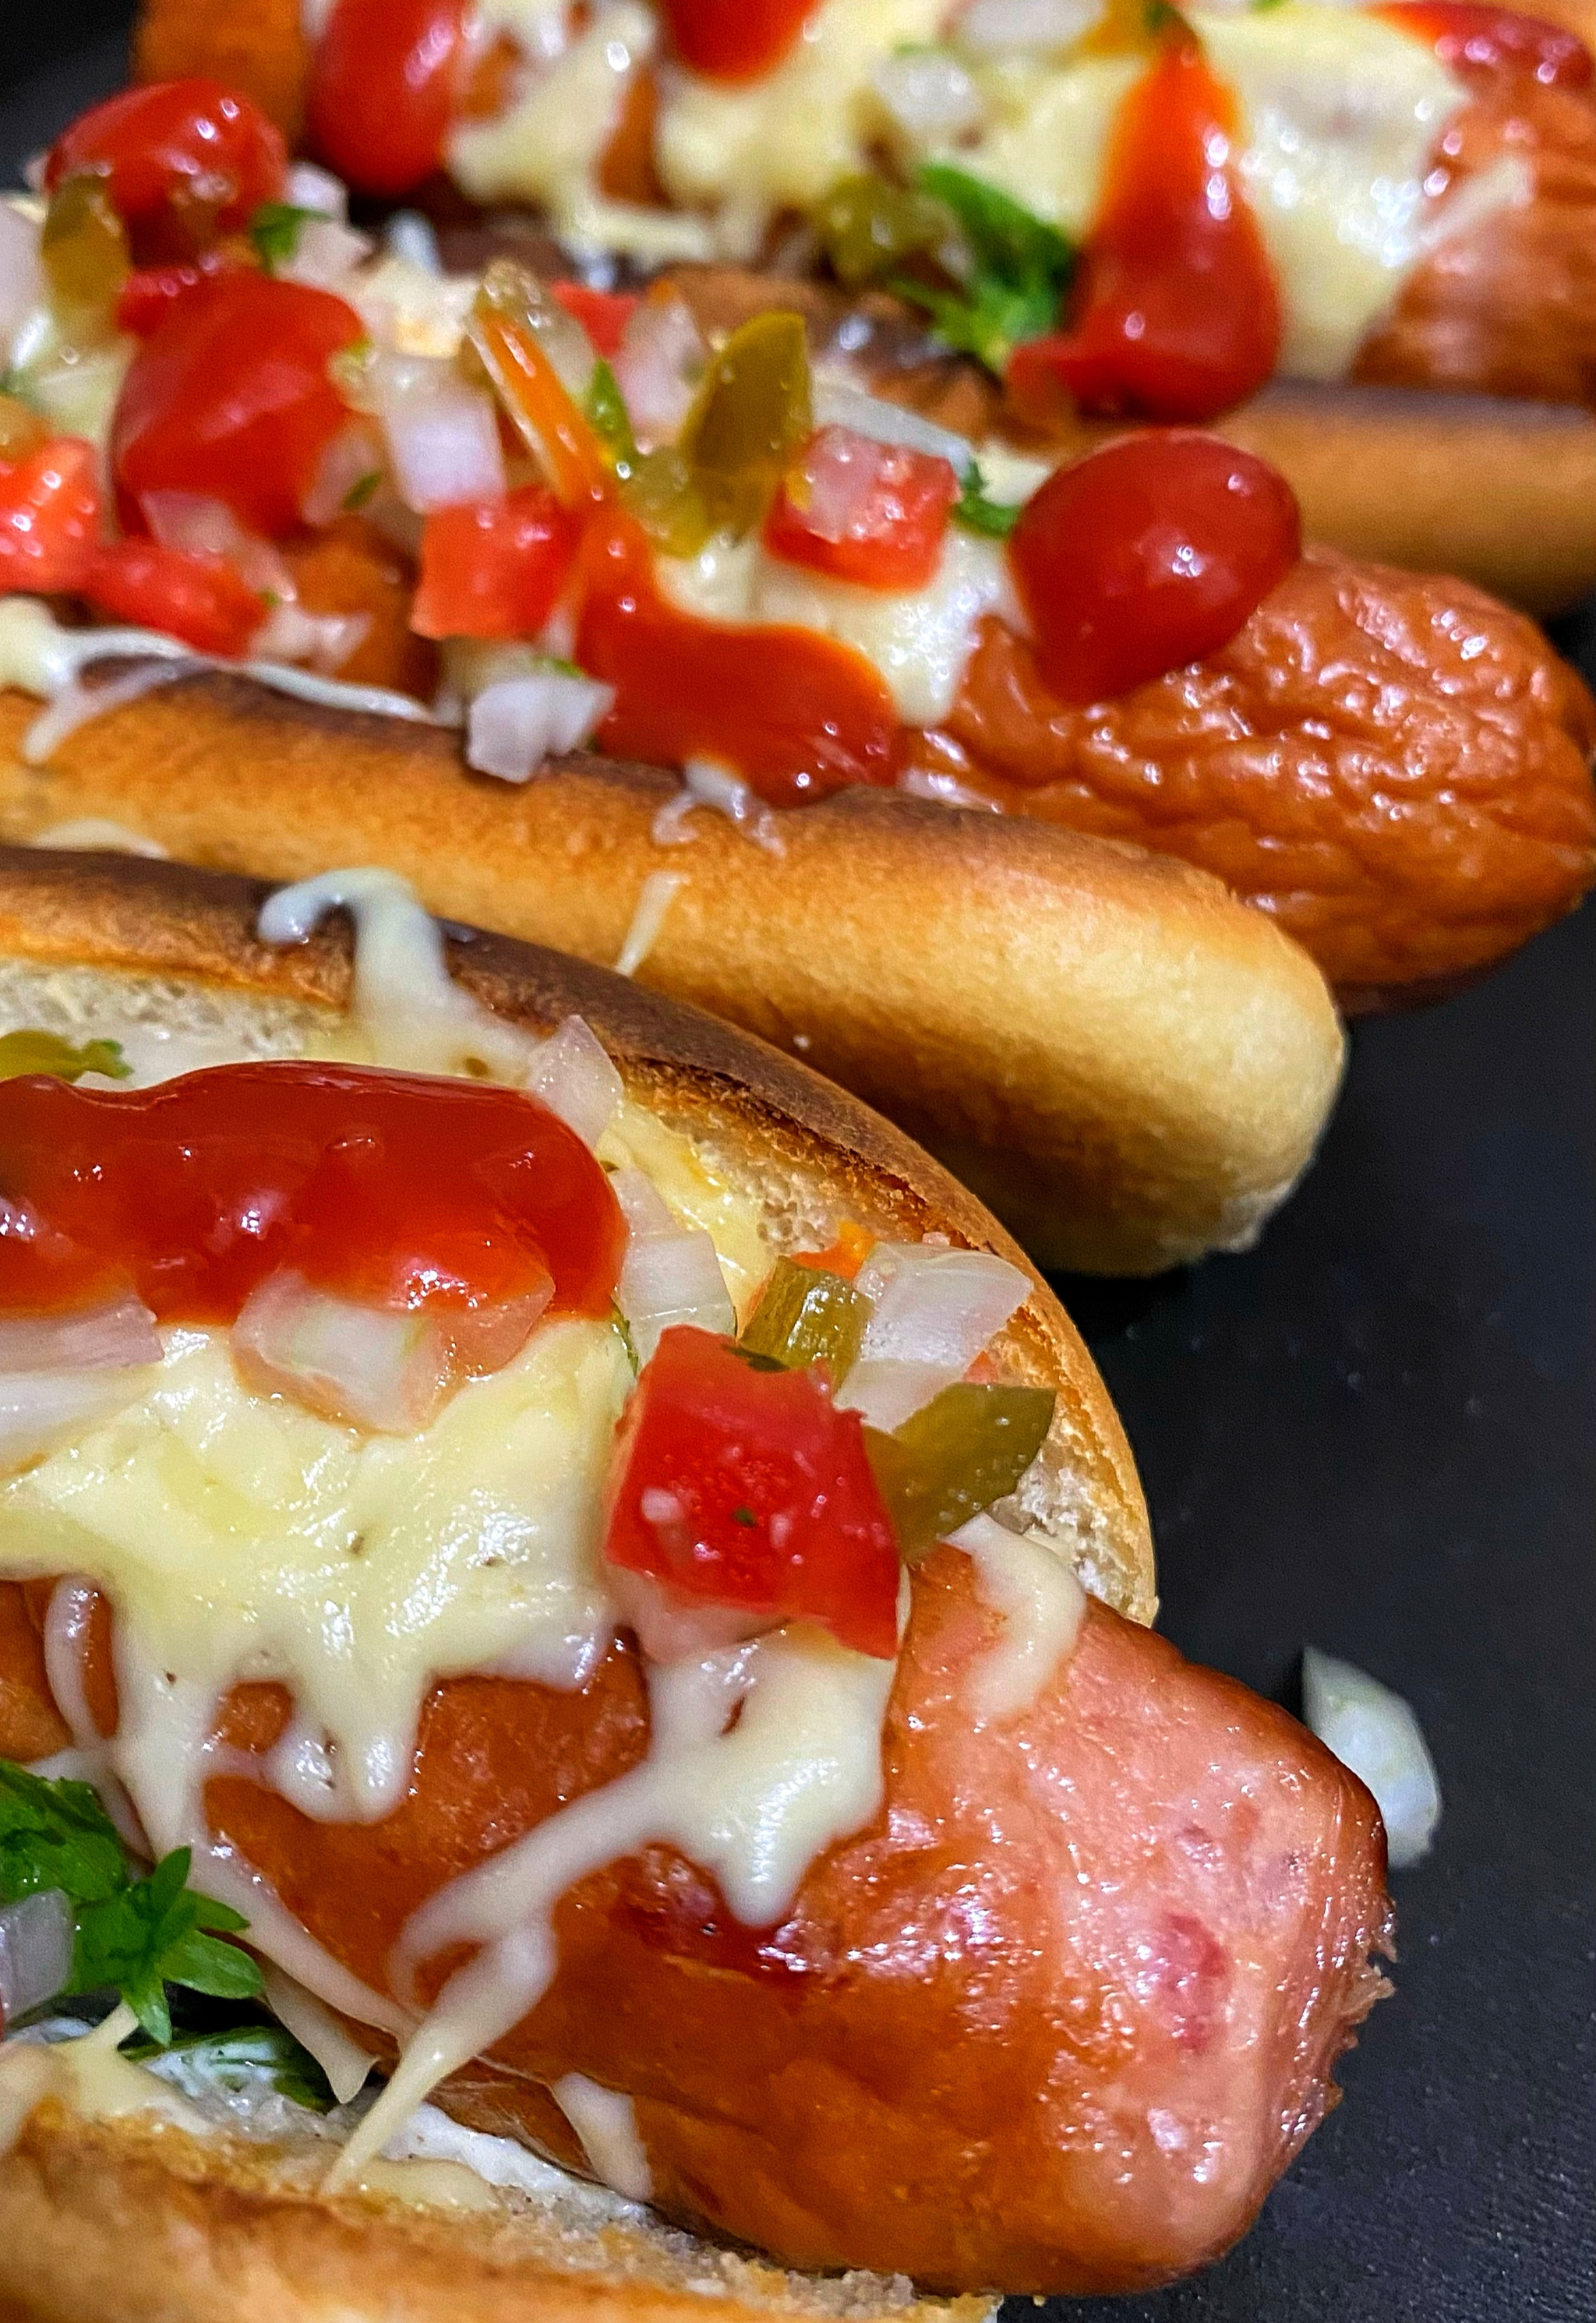 Delicious and simple - hot dogs with Mexican flavor - My, Recipe, Yummy, Food, Men's cooking, Dinner party, Fast food, Mat, Longpost